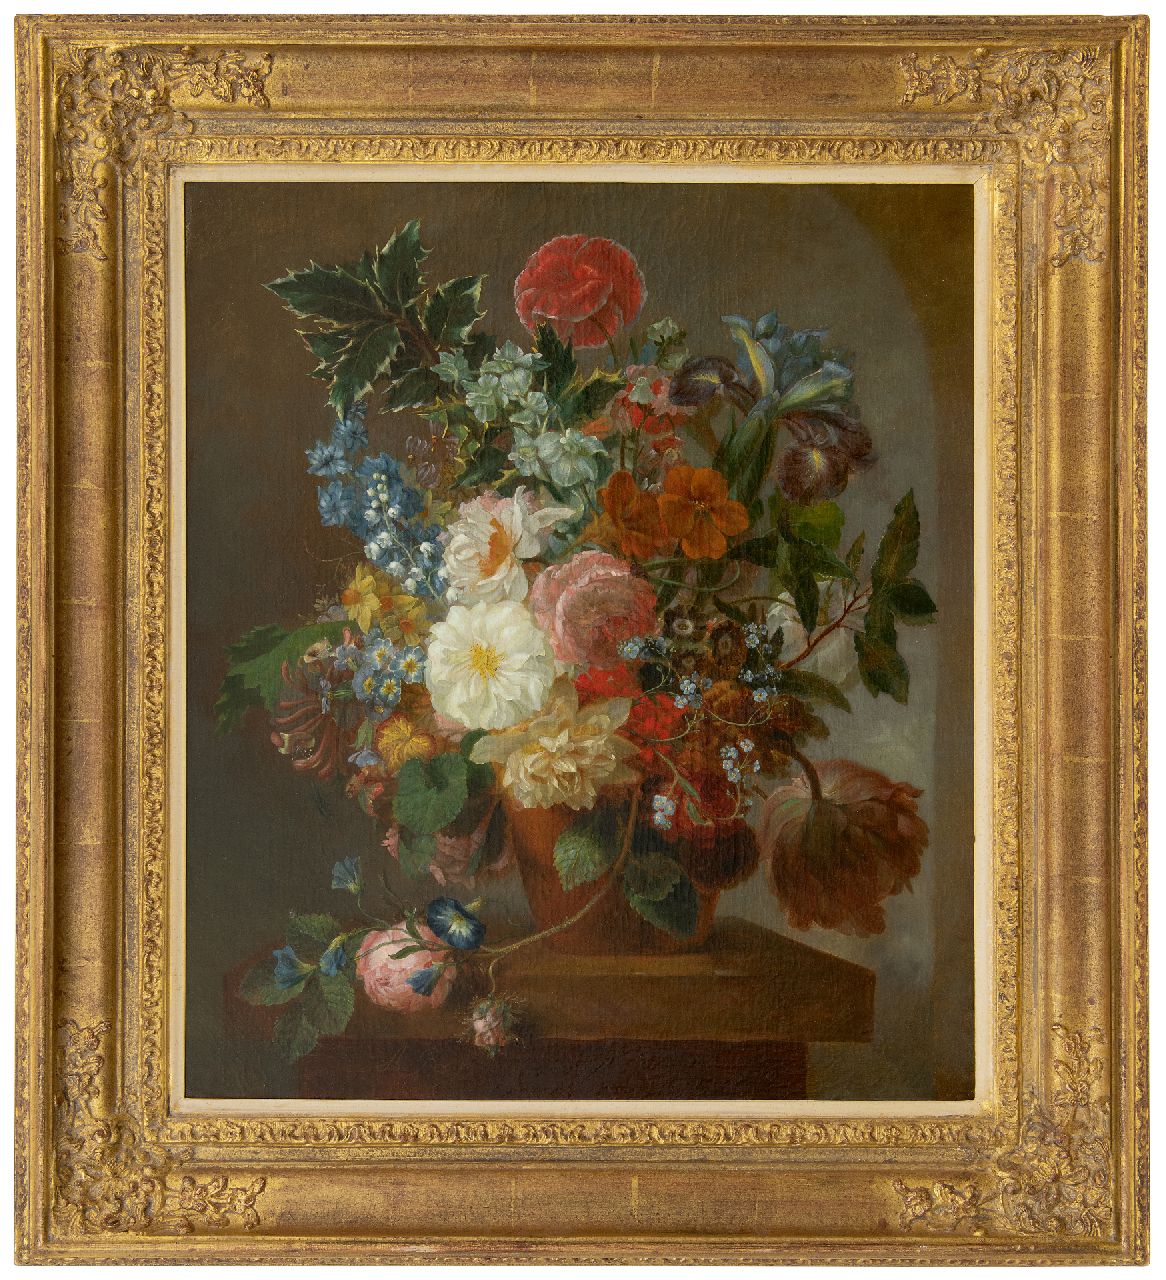 Reijerman A.  | Annette 'Anna' Reijerman, A flower still life on a marble ledge, oil on canvas 59.7 x 51.6 cm, signed l.l. with initials